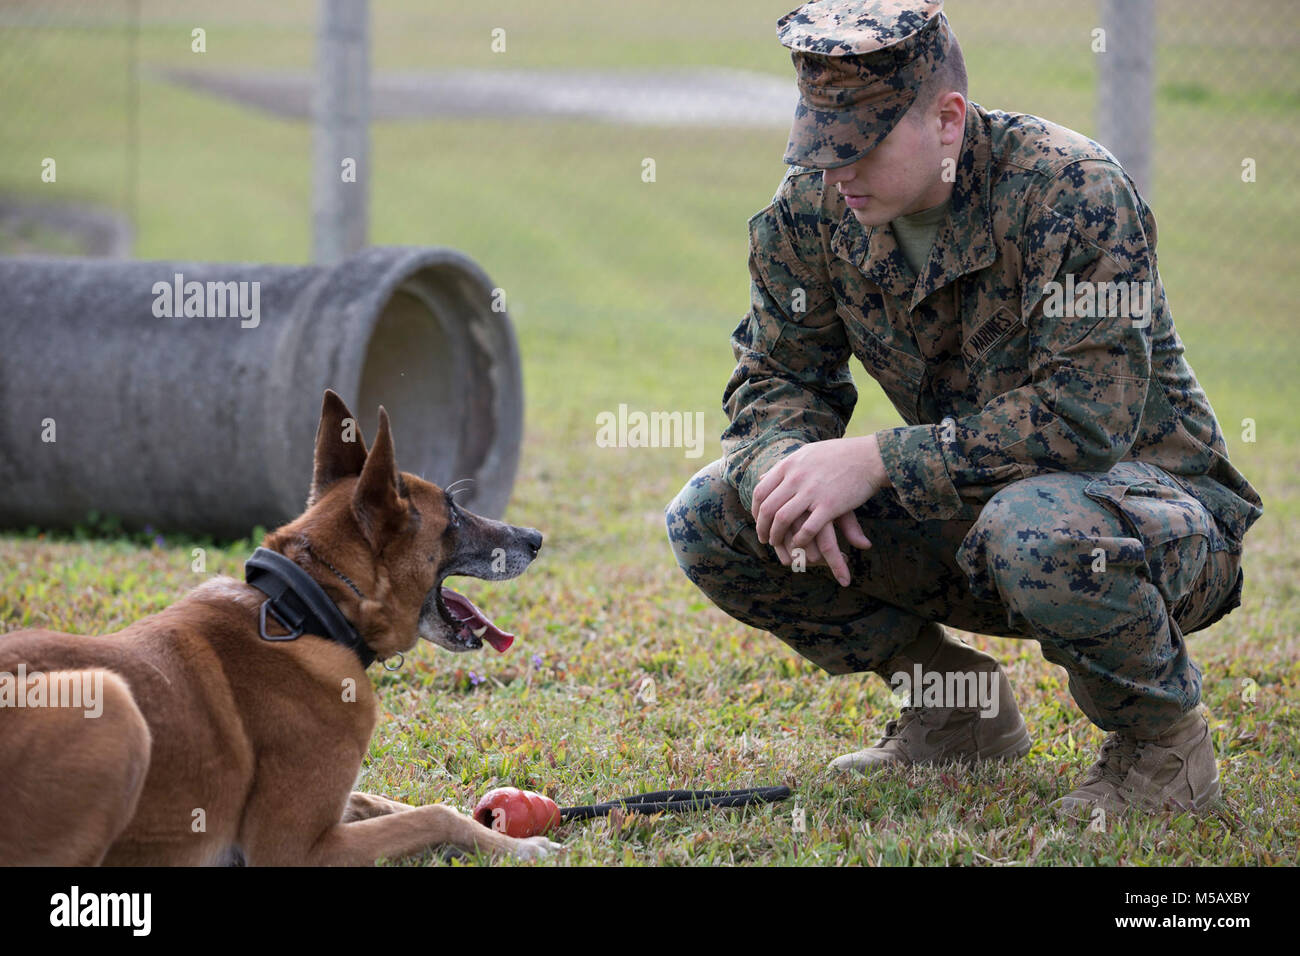 KADENA AIR BASE, OKINAWA, Japan – Lance Cpl. Matthew Yaw and Military Working Dog Bbulter practice “out” drills Feb. 13 at the Marine Corps Installations Pacific K-9 kennels on Kadena Air Base, Okinawa, Japan. Out is a command that military dog handlers give their MWD to release an object. Handlers and their dogs practice training through the obedience course to consistently instill instant, willing obedience. K-9 units are a visual and psychological deterrent which helps keep military installations narcotics and explosive free. Yaw is a military police officer and a dog handler with Headquart Stock Photo